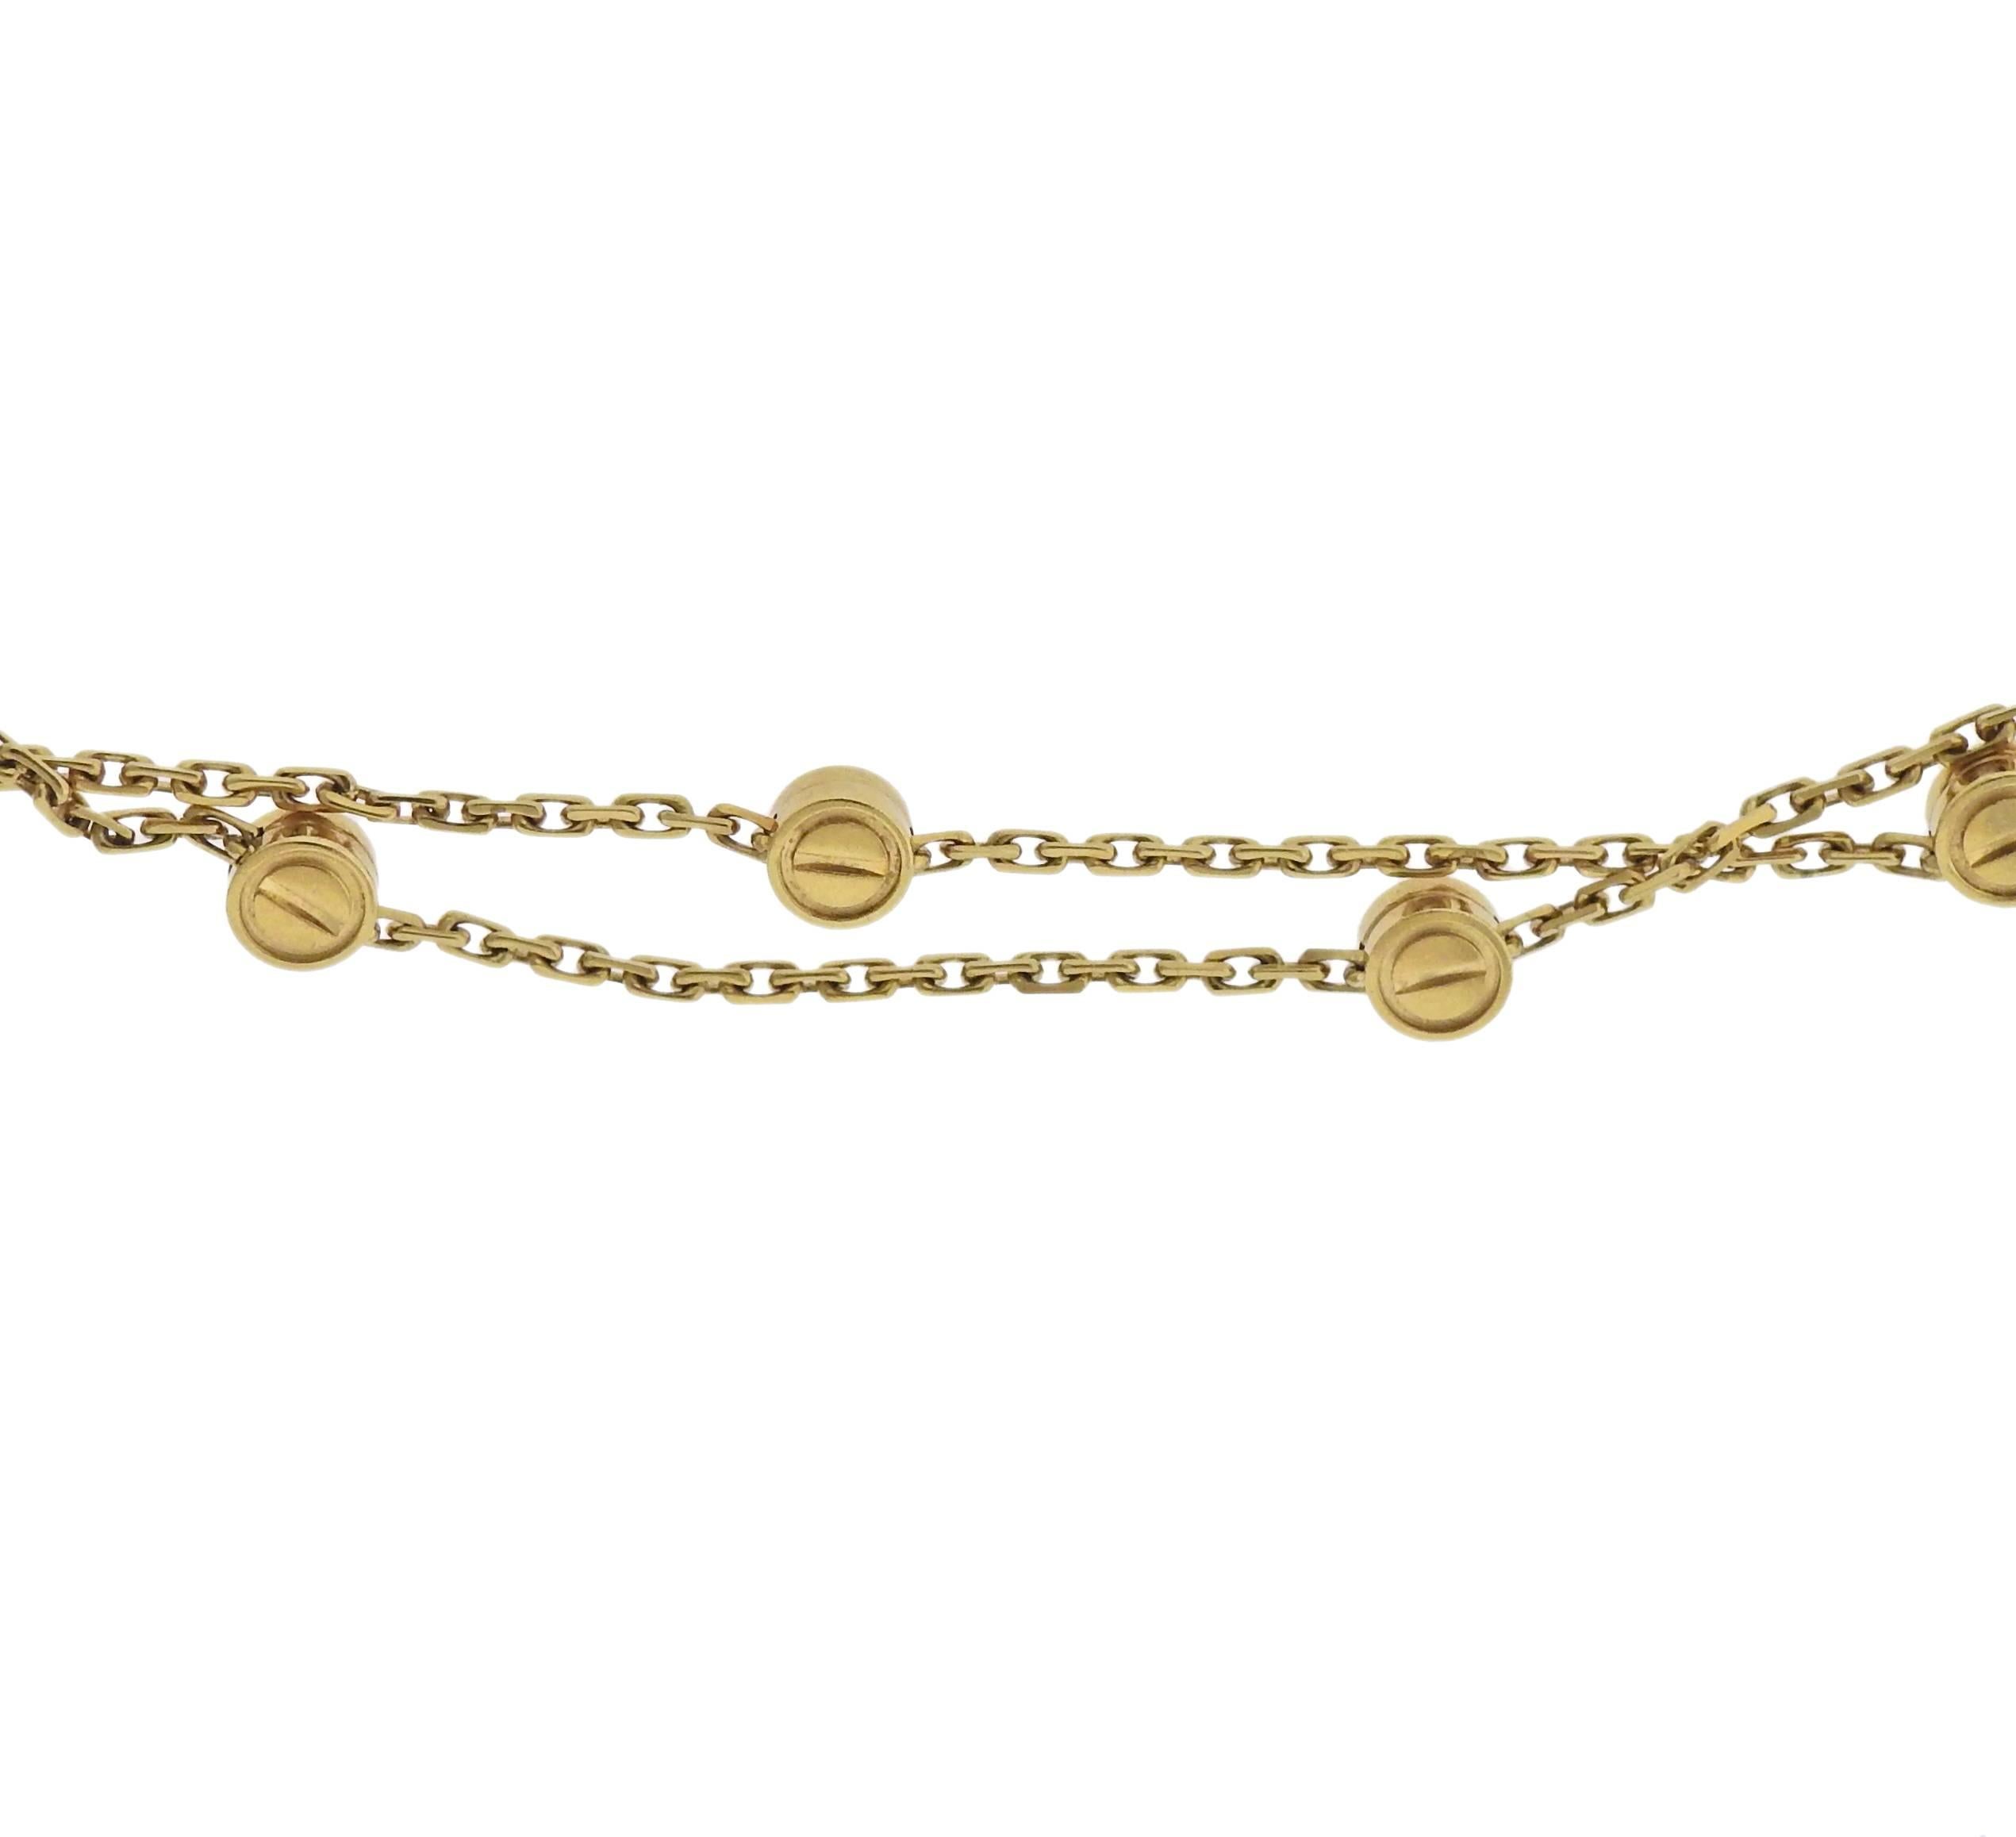 Rare vintage 18k yellow gold long Love station necklace, crafted by Cartier. Necklace is 46